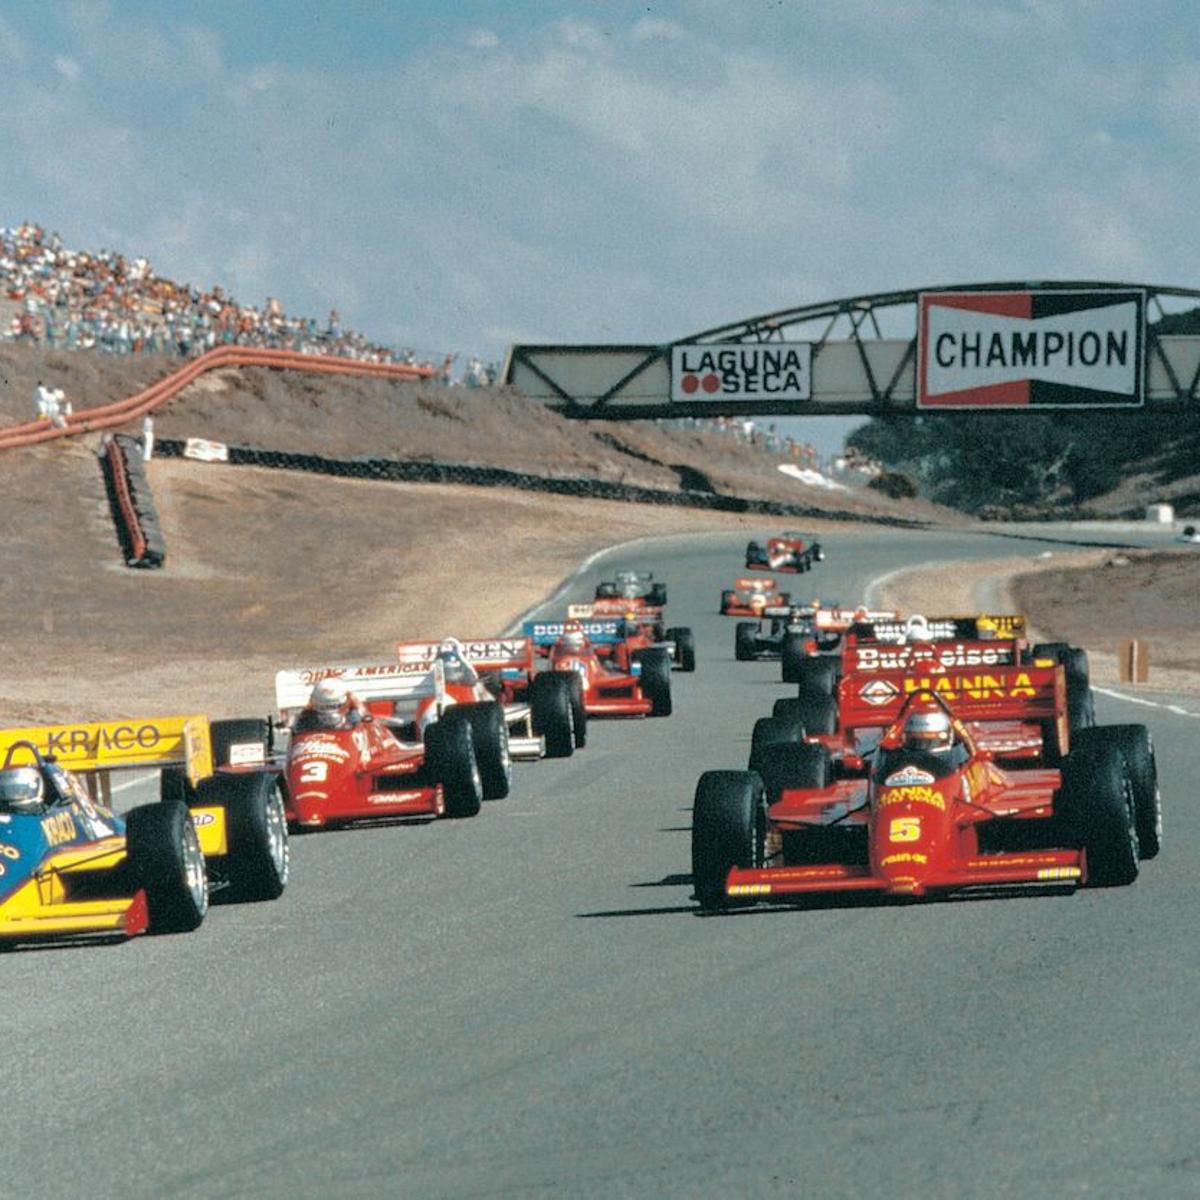 1987 CART IndyCar start at Laguna Seca with Mario Andretti on pole and his son Michael Andretti alongside